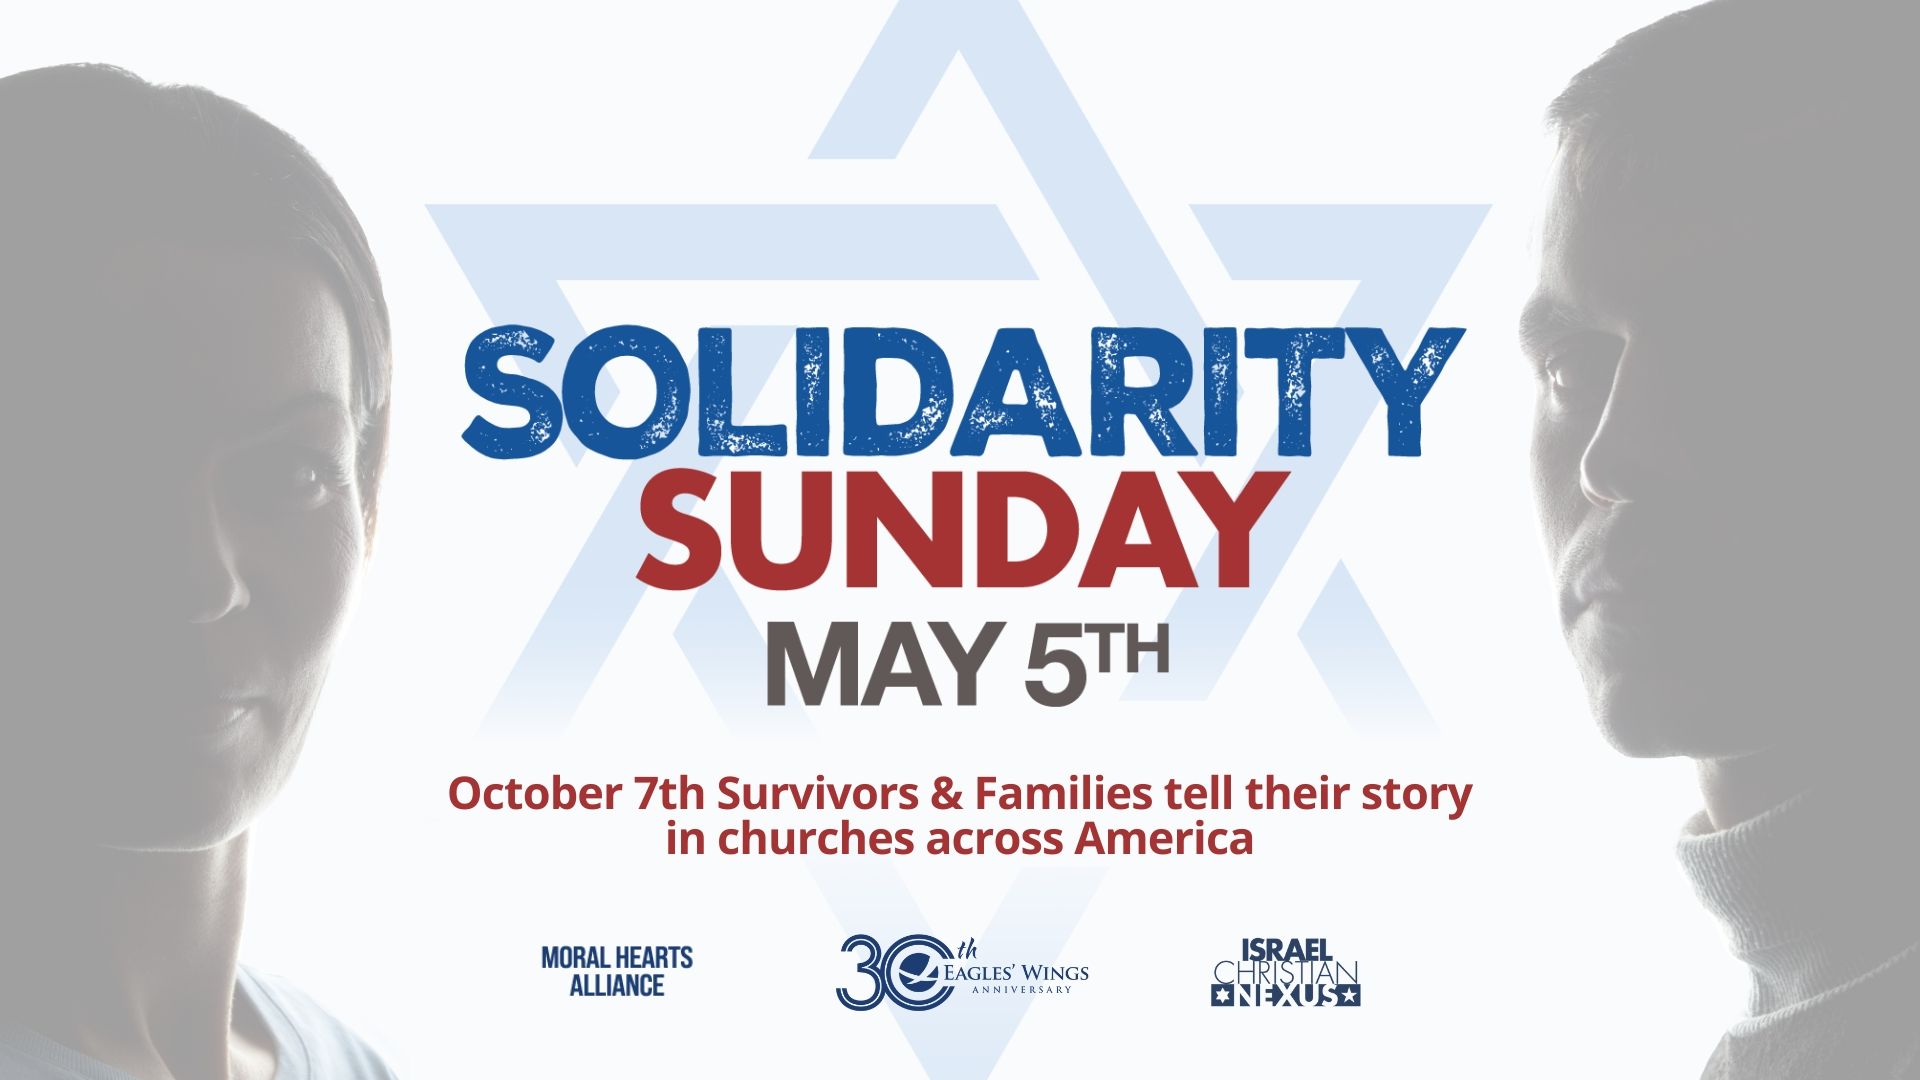 Solidarity Sunday by Eagles Wings and Moral Hearts Alliance